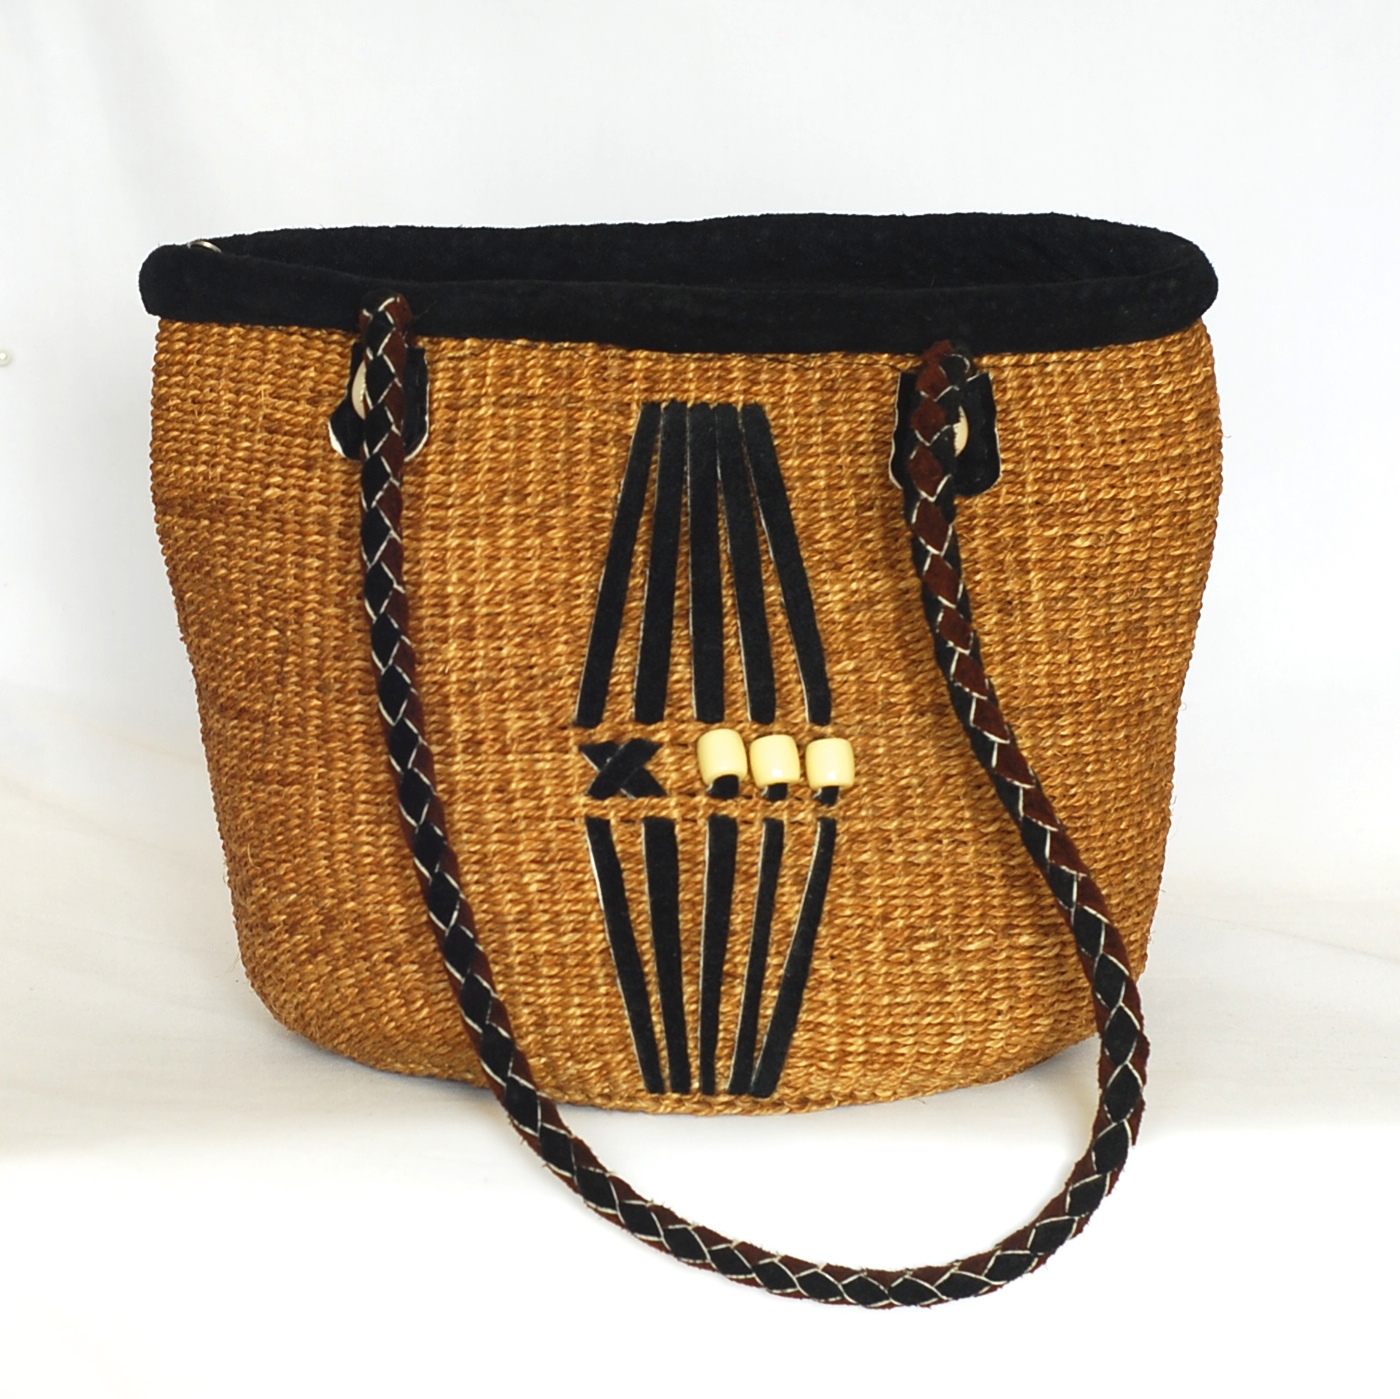 Hand Woven Straw Bucket Bag With Black Suede Trim & Braided Handles ...